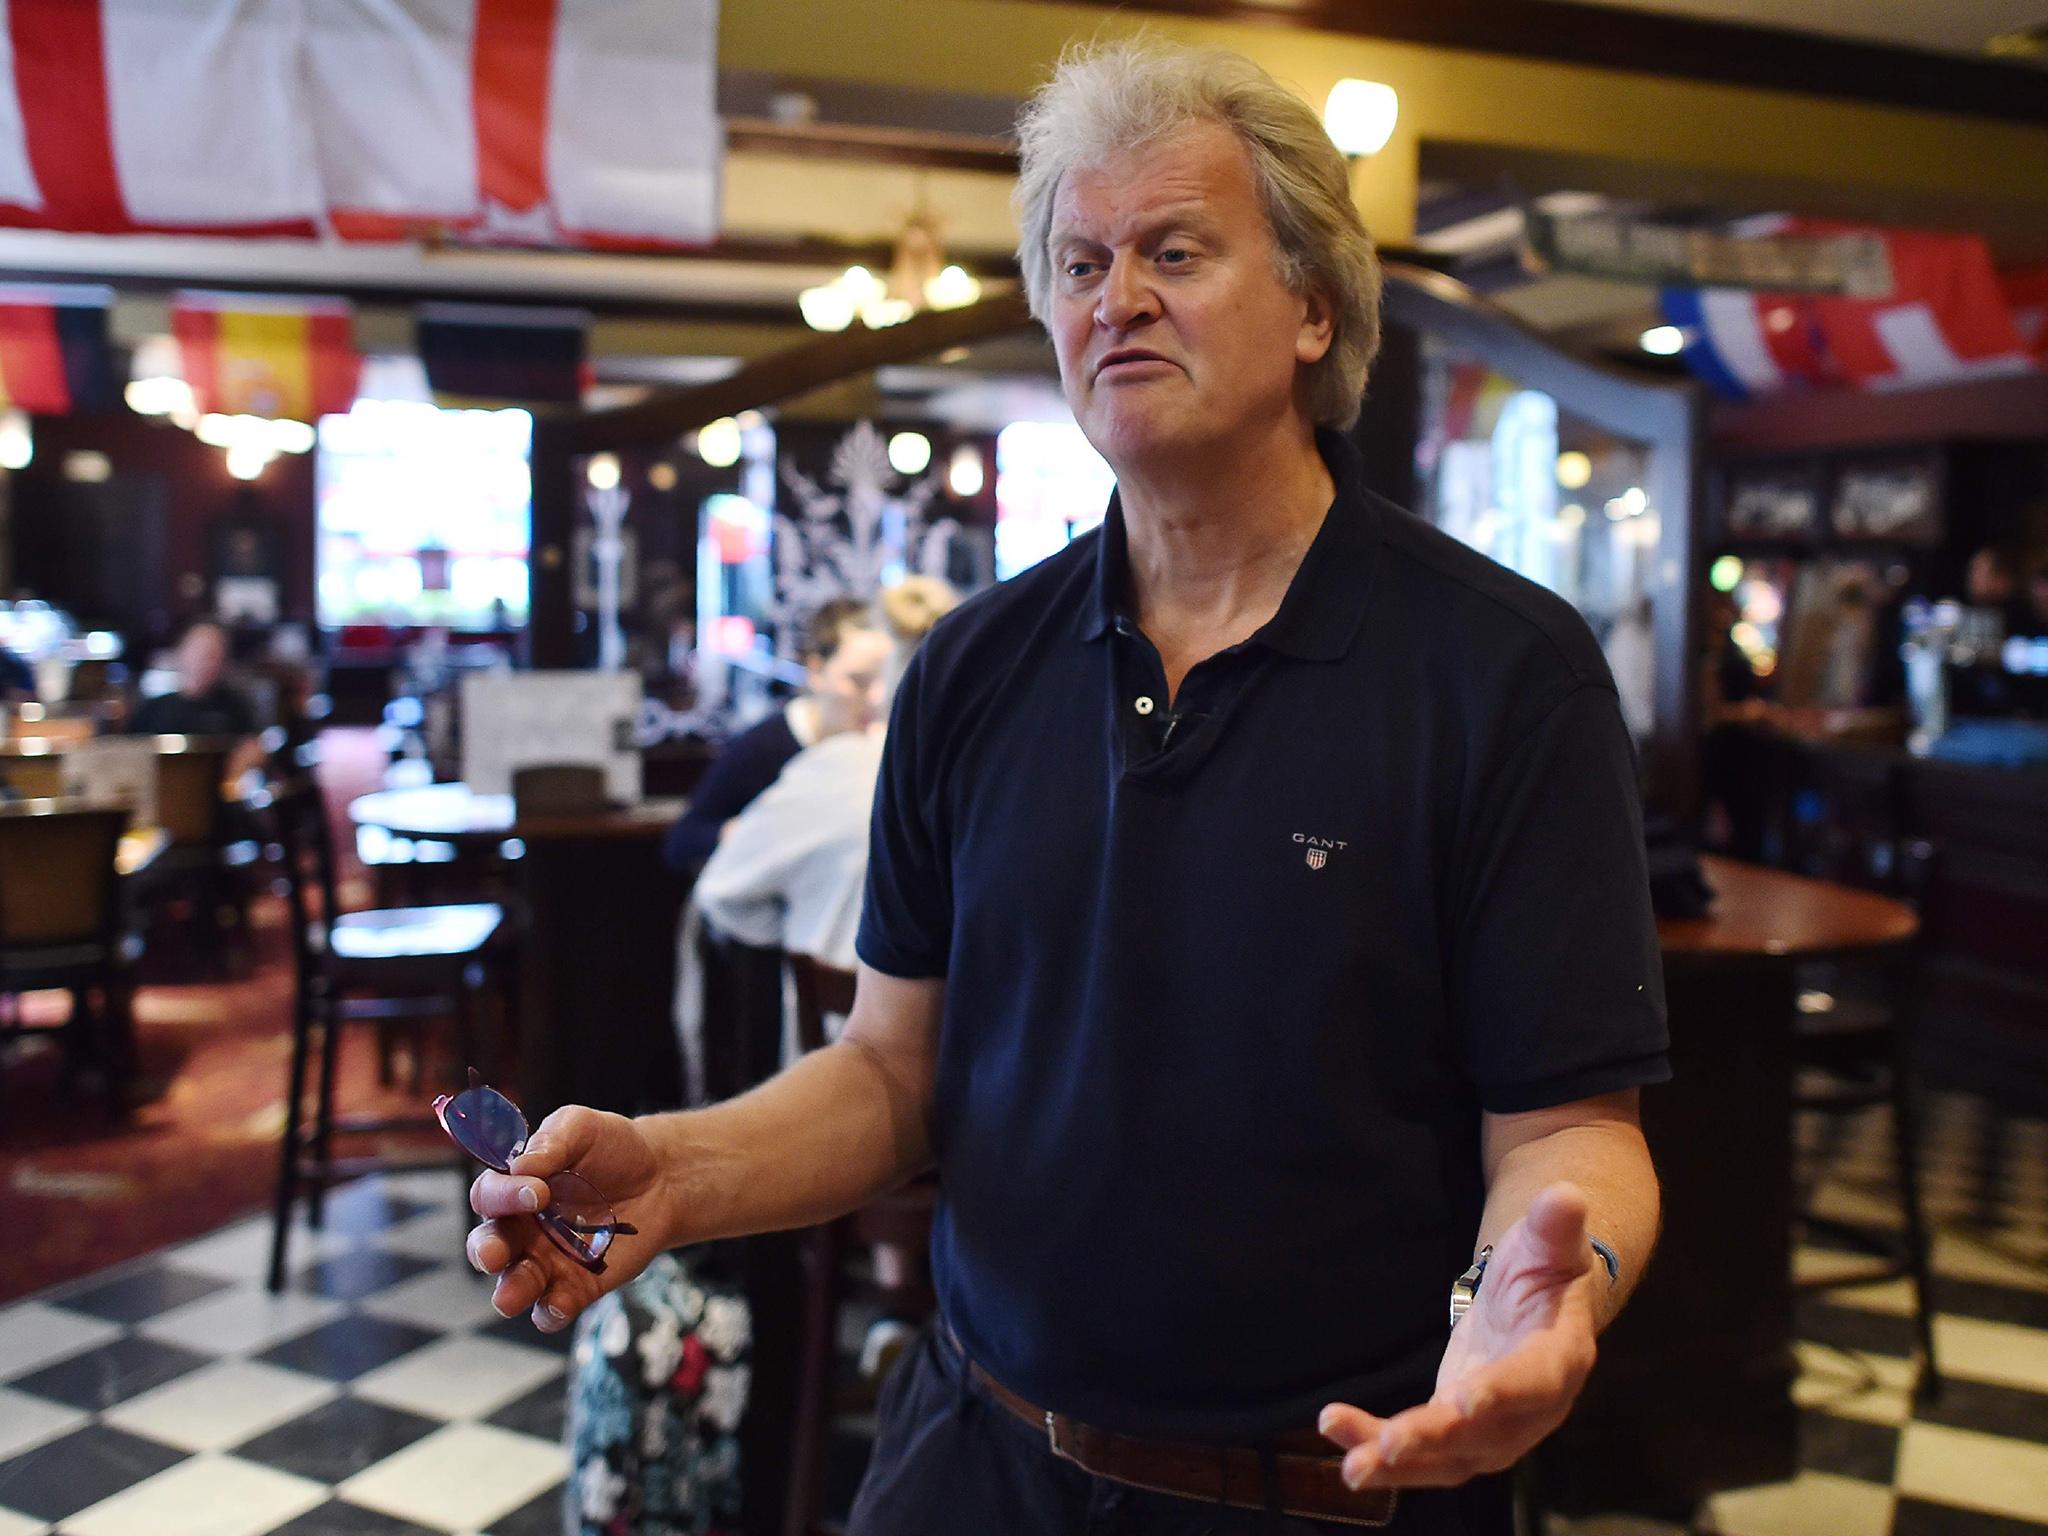 Wetherspoons boss opinionated boss Tim Martin who has closed his company's social media accounts